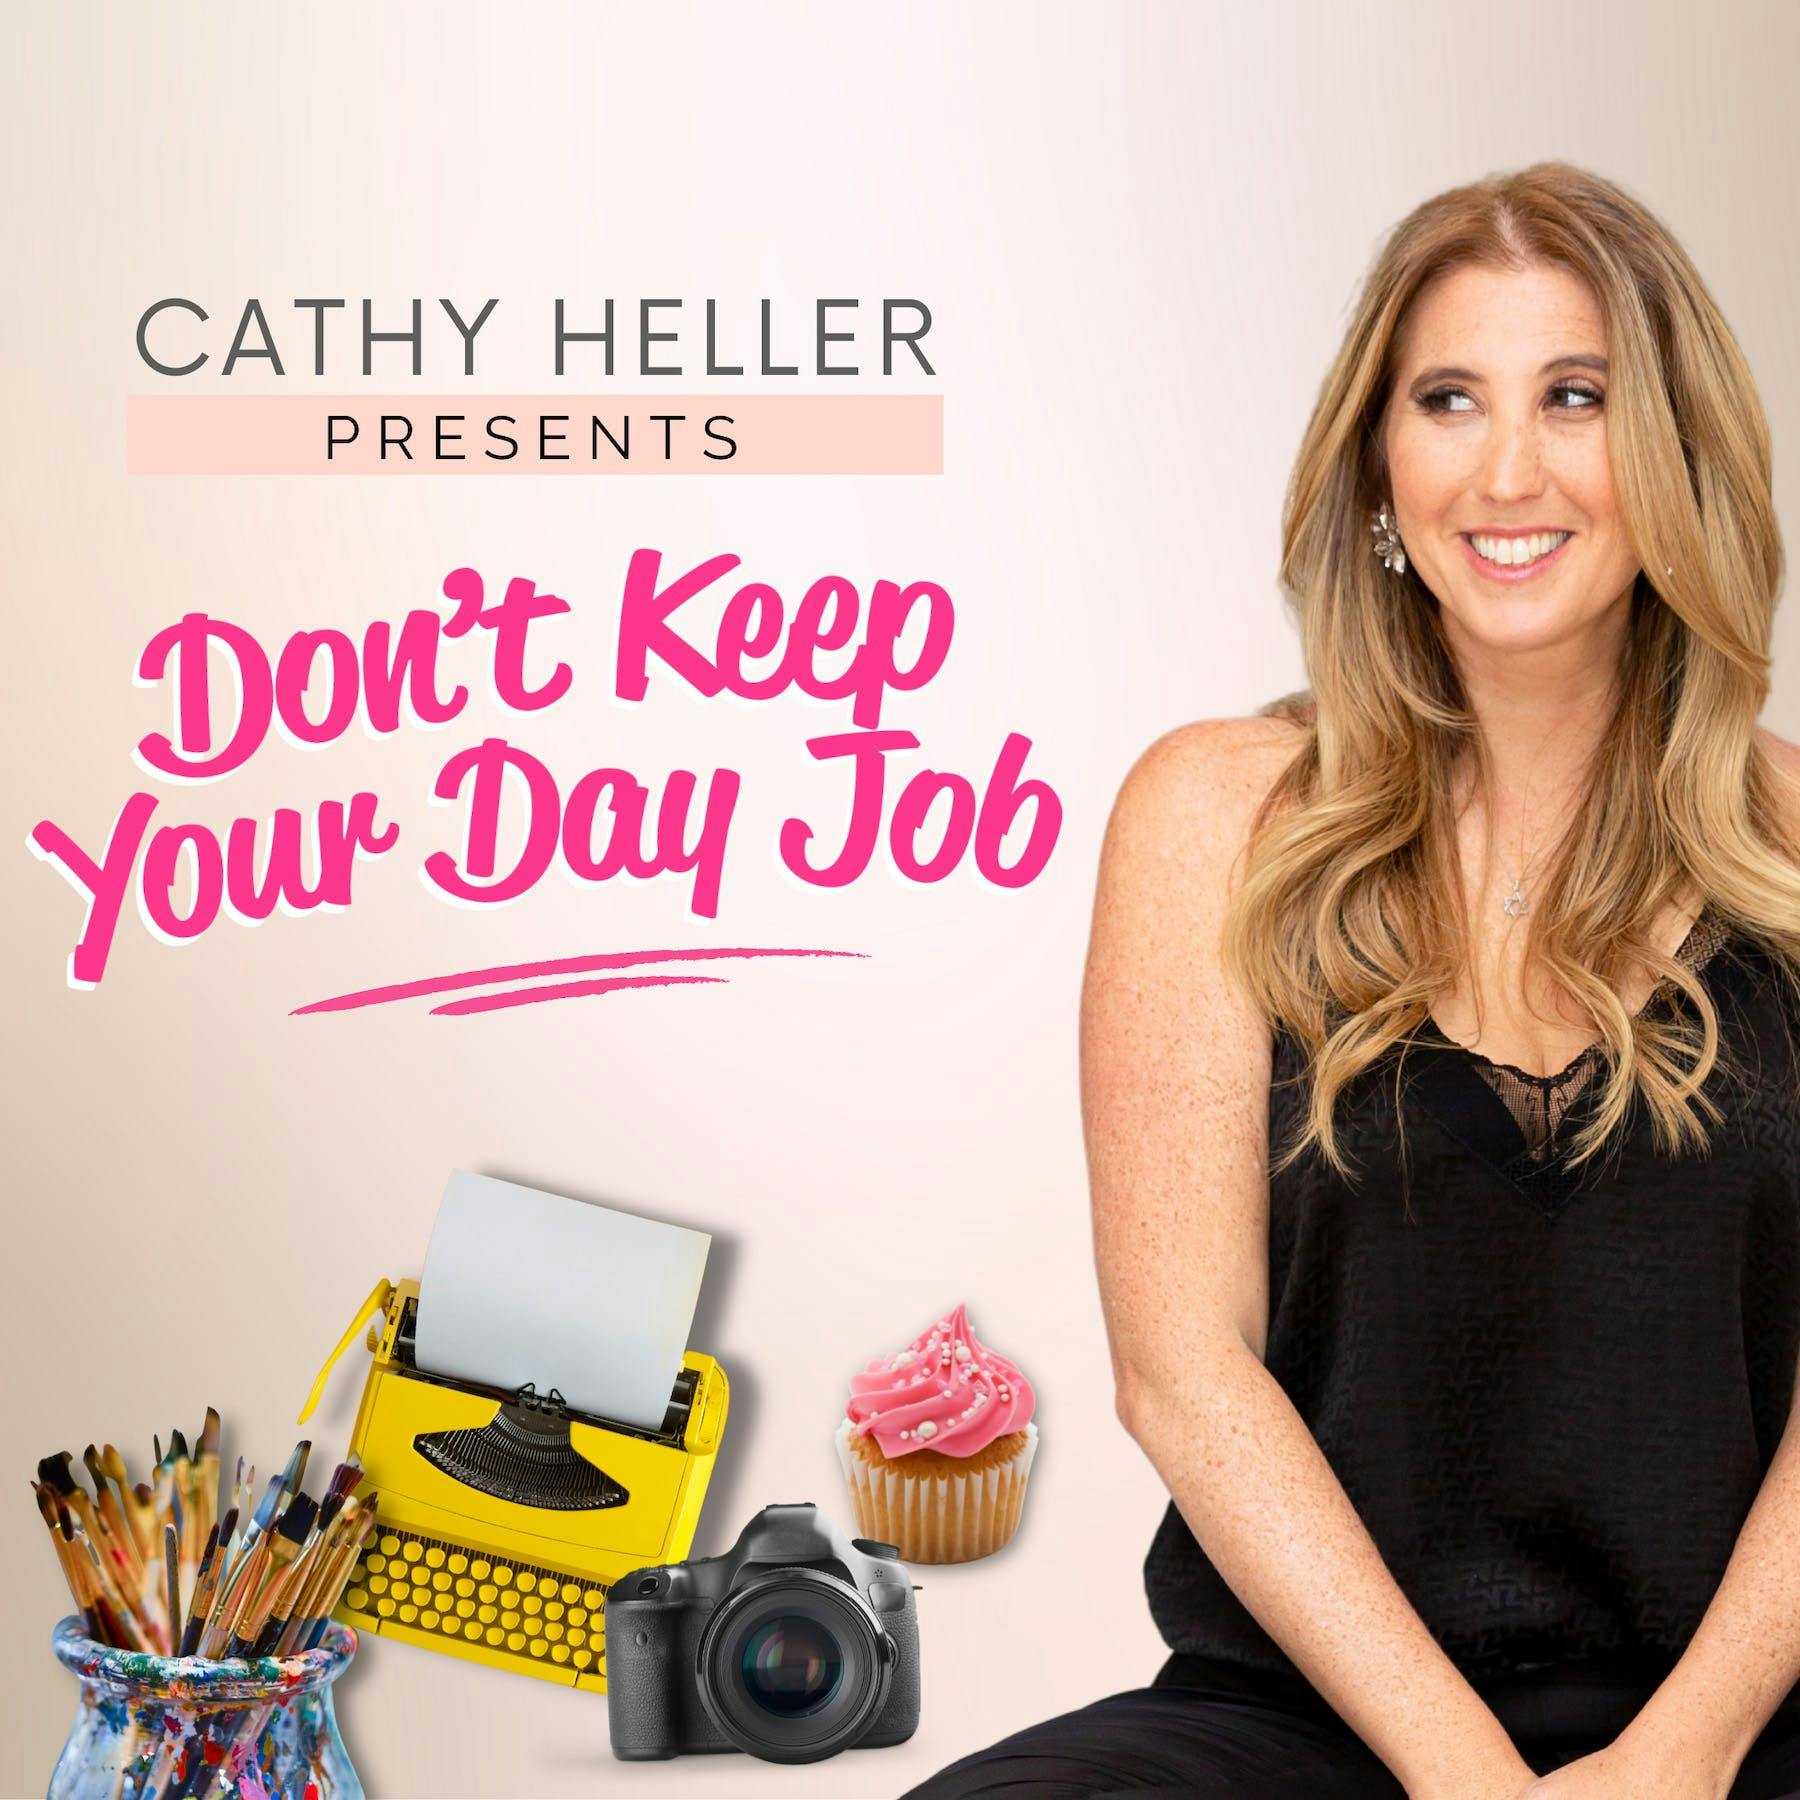 Cathy Heller Presents Don't Keep Your Day Job podcast show image